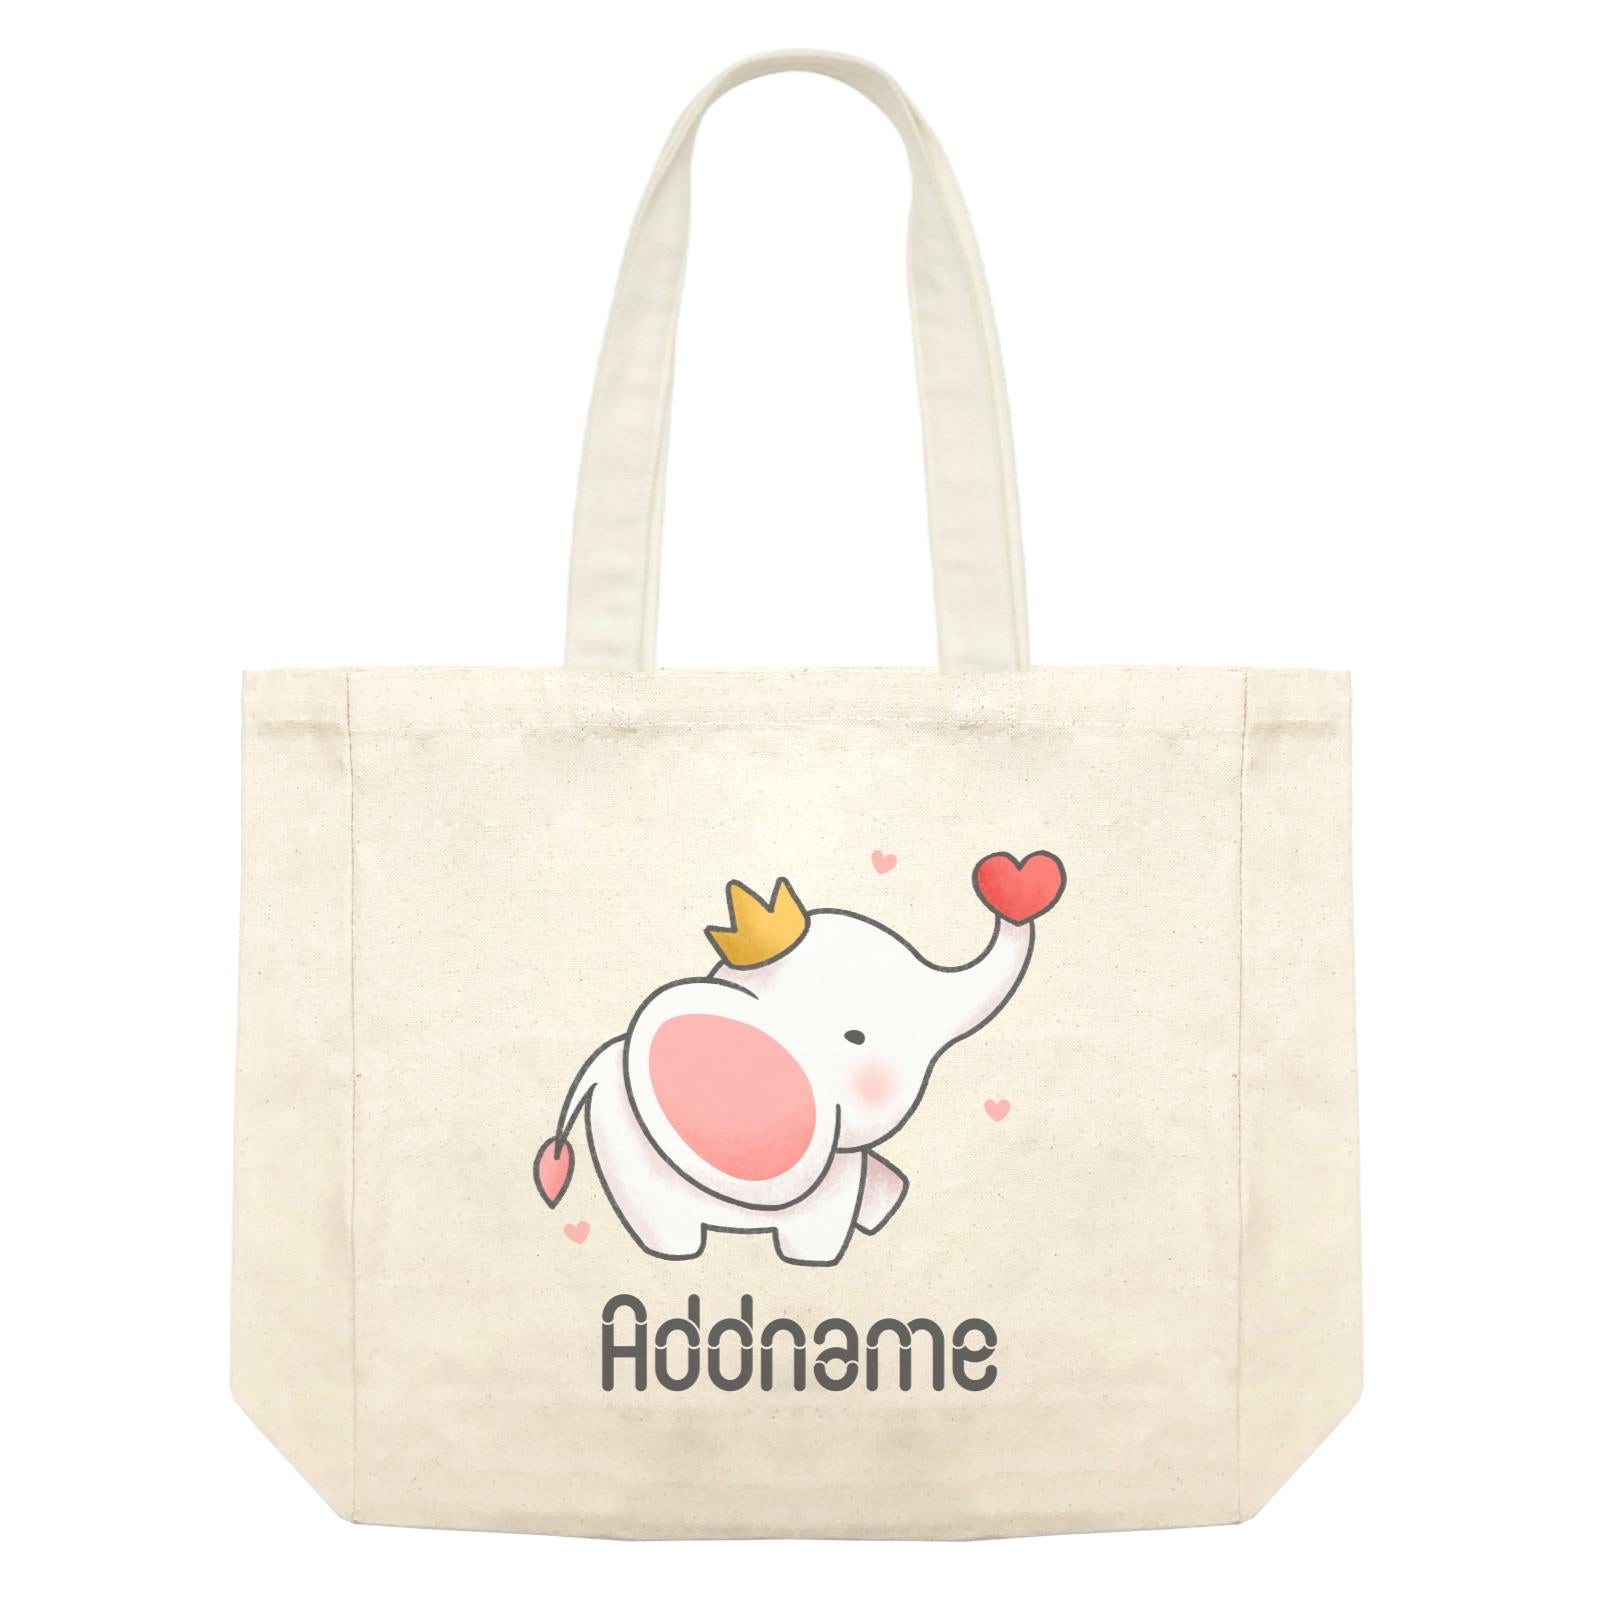 Cute Hand Drawn Style Baby Elephant with Heart and Crown Addname Shopping Bag